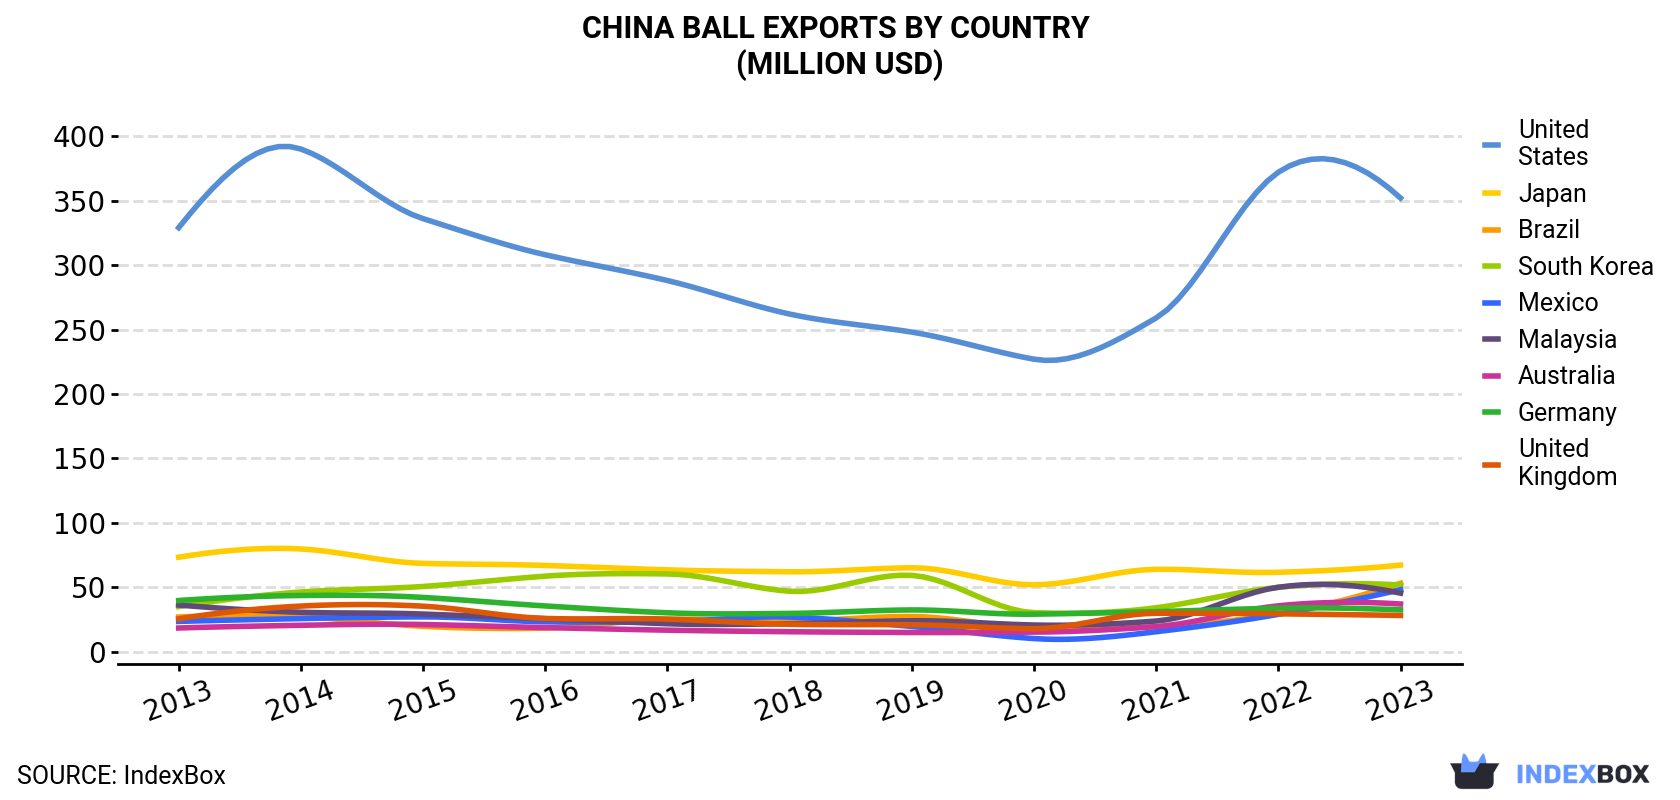 China Ball Exports By Country (Million USD)